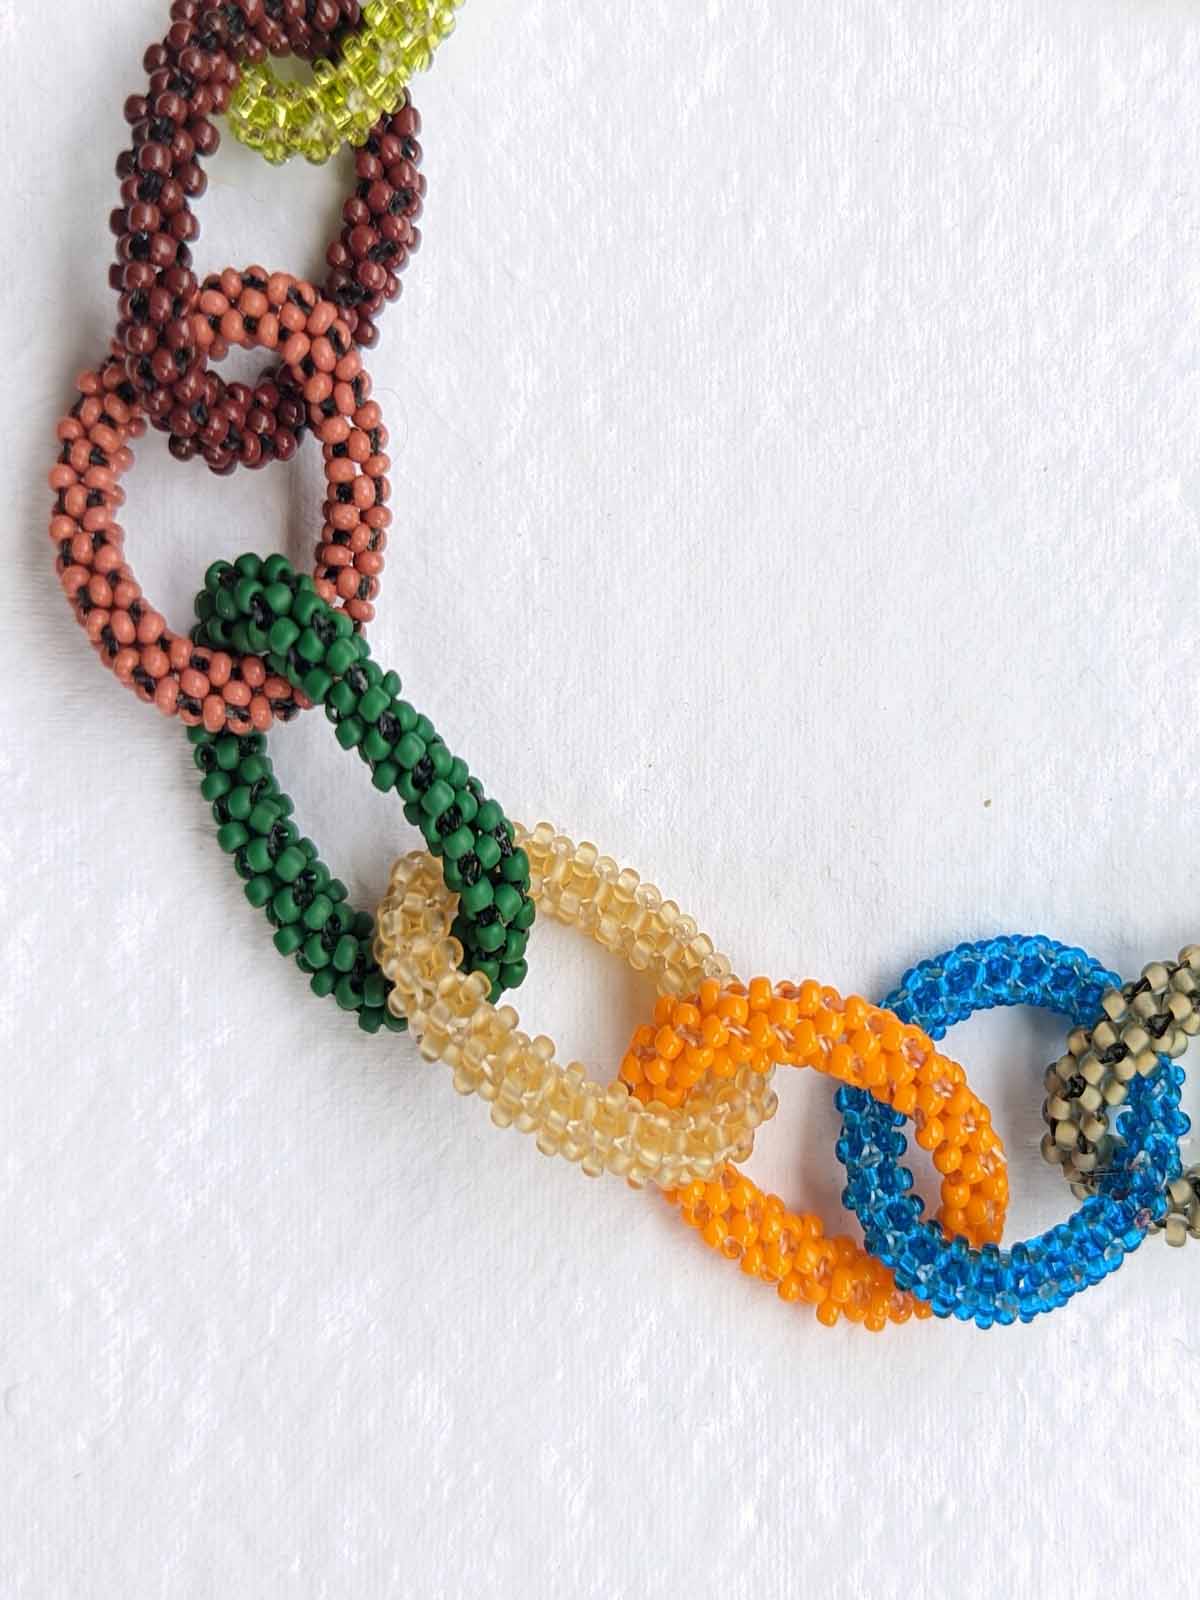 The Multicolored Chain-Links Necklace